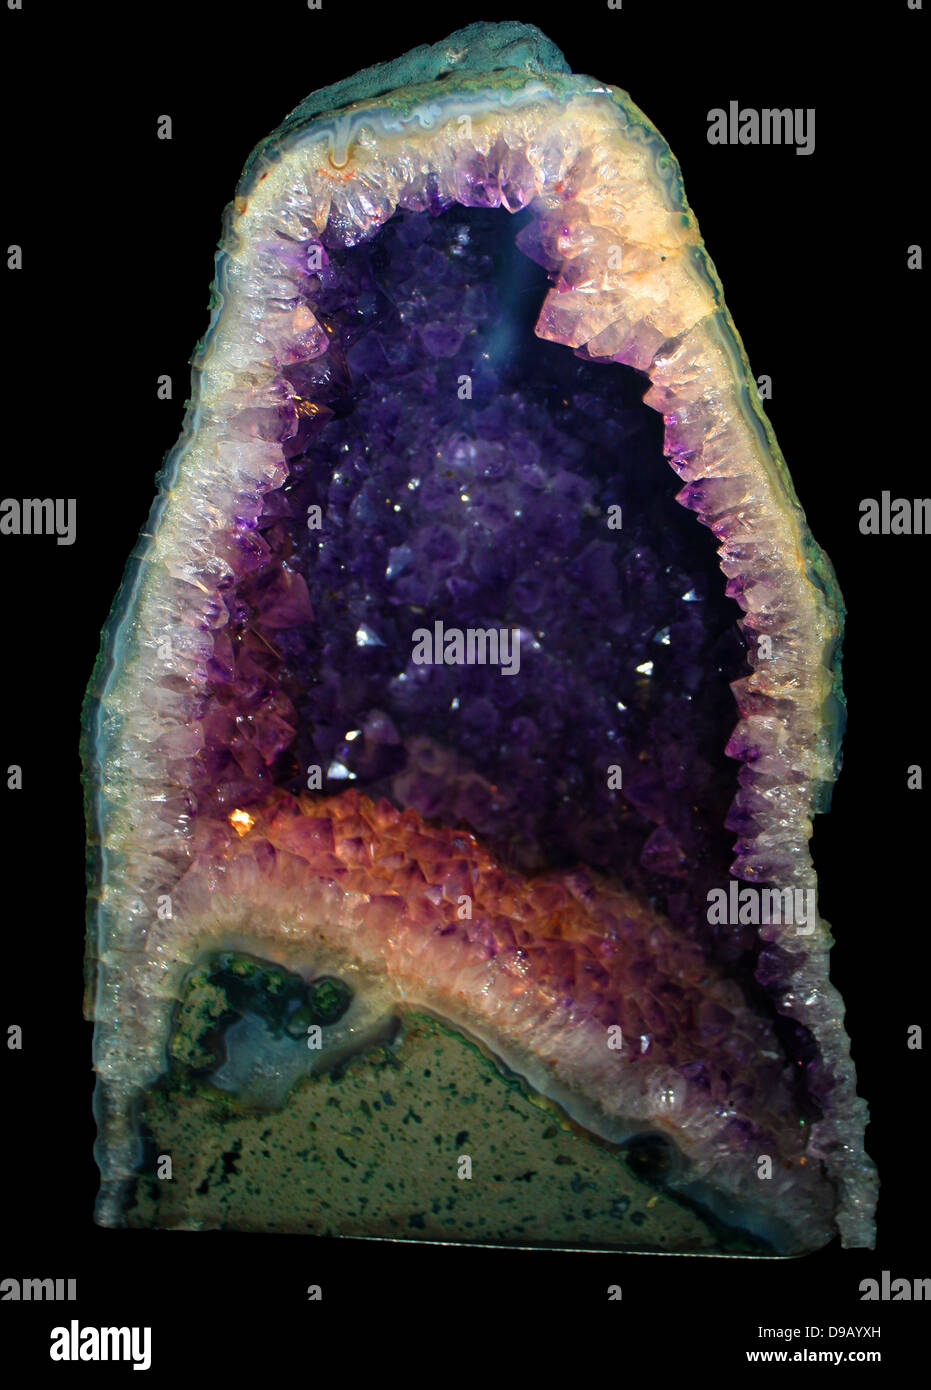 Amethyst. The purple crystals are a variety of the silica mineral quartz.  Here they line a geode, a crystal-lined cavity in ancient lava.  A variety of powers were attributed to amethyst including the ability to cure drunkeness. Stock Photo